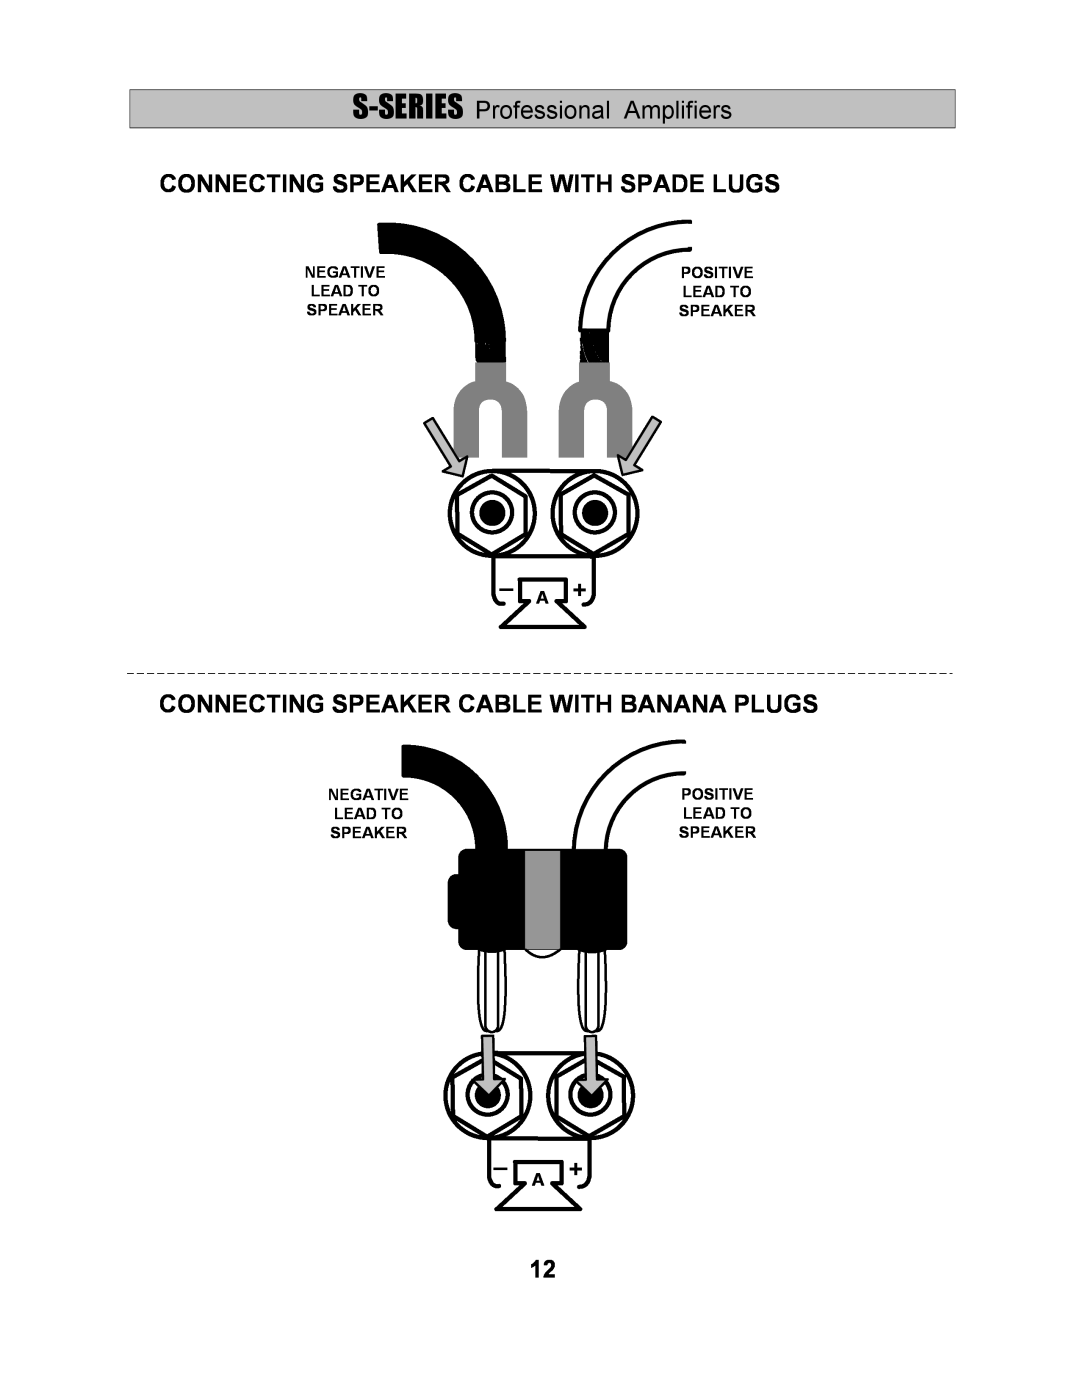 Wharfedale S-1000 Connecting Speaker Cable With Spade Lugs, Connecting Speaker Cable With Banana Plugs, Negative, Positive 